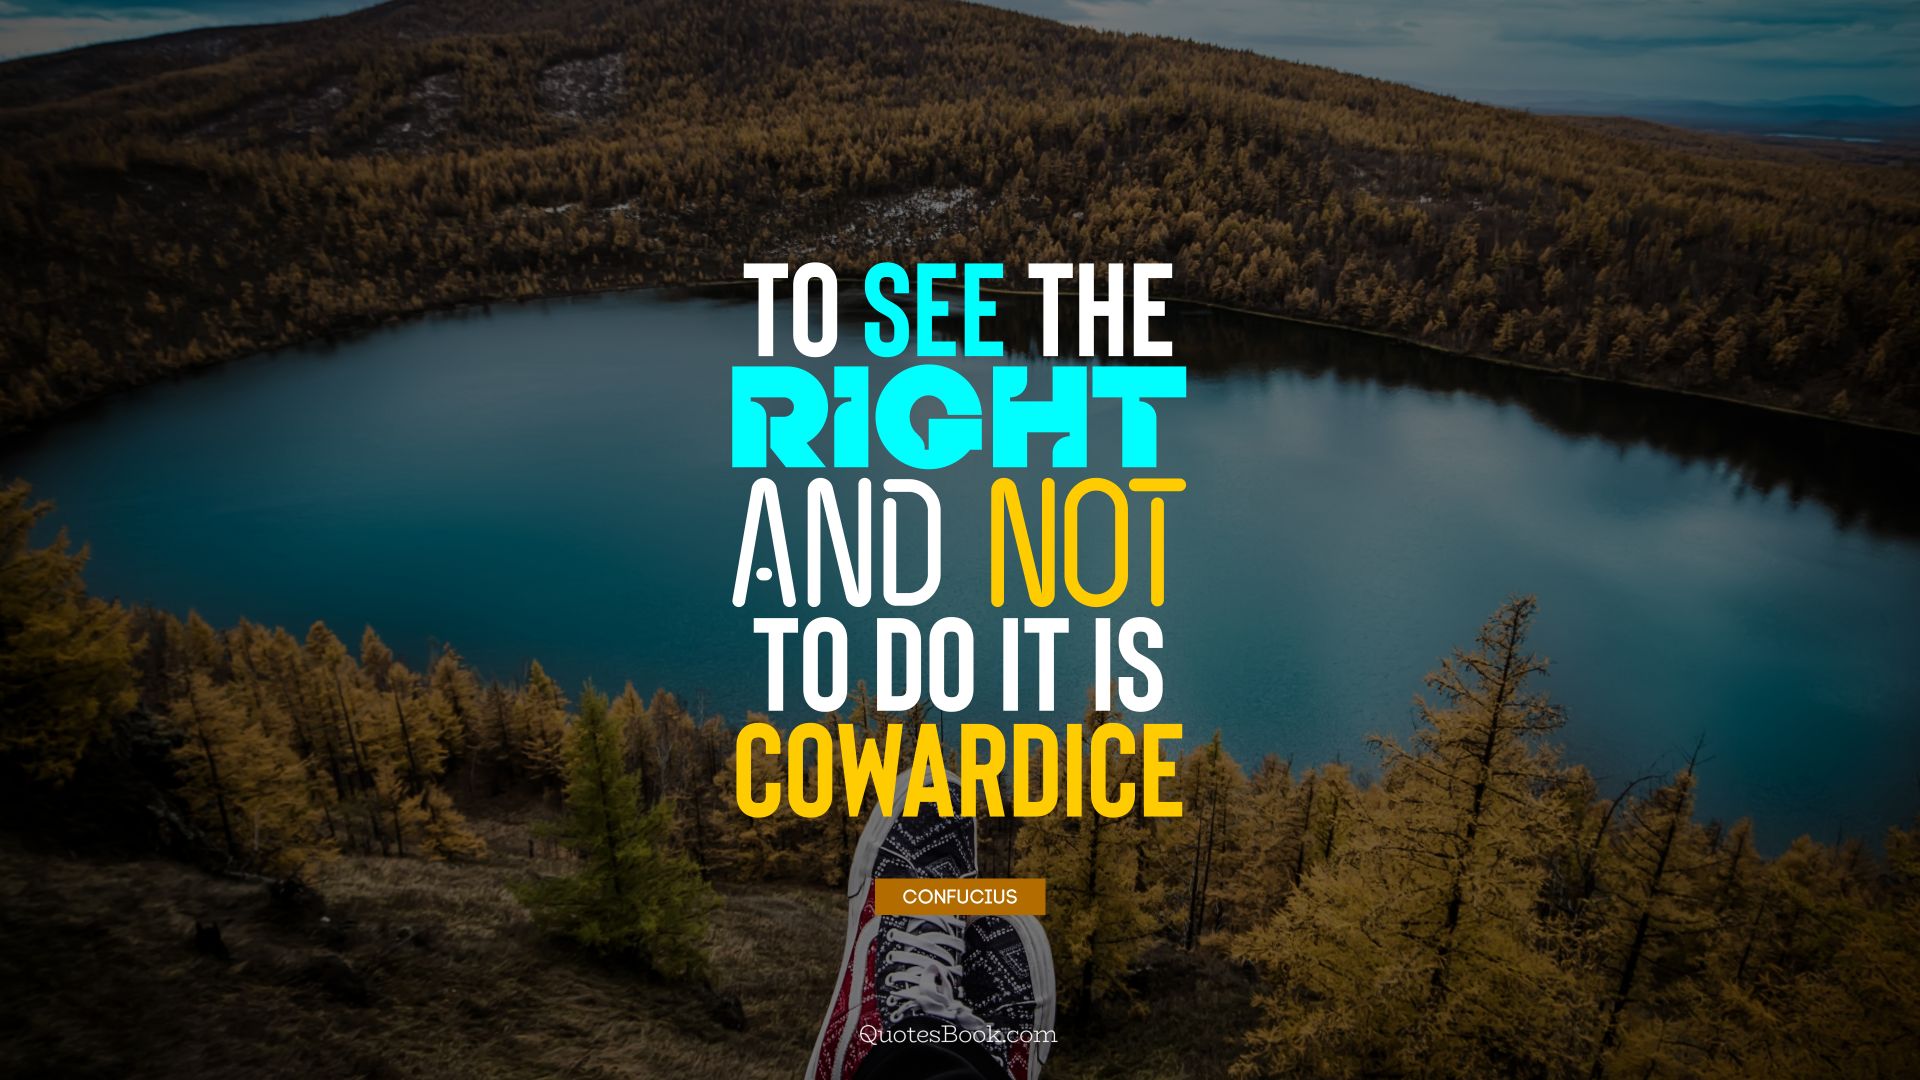 To see the right and not to do it is cowardice. - Quote by Confucius